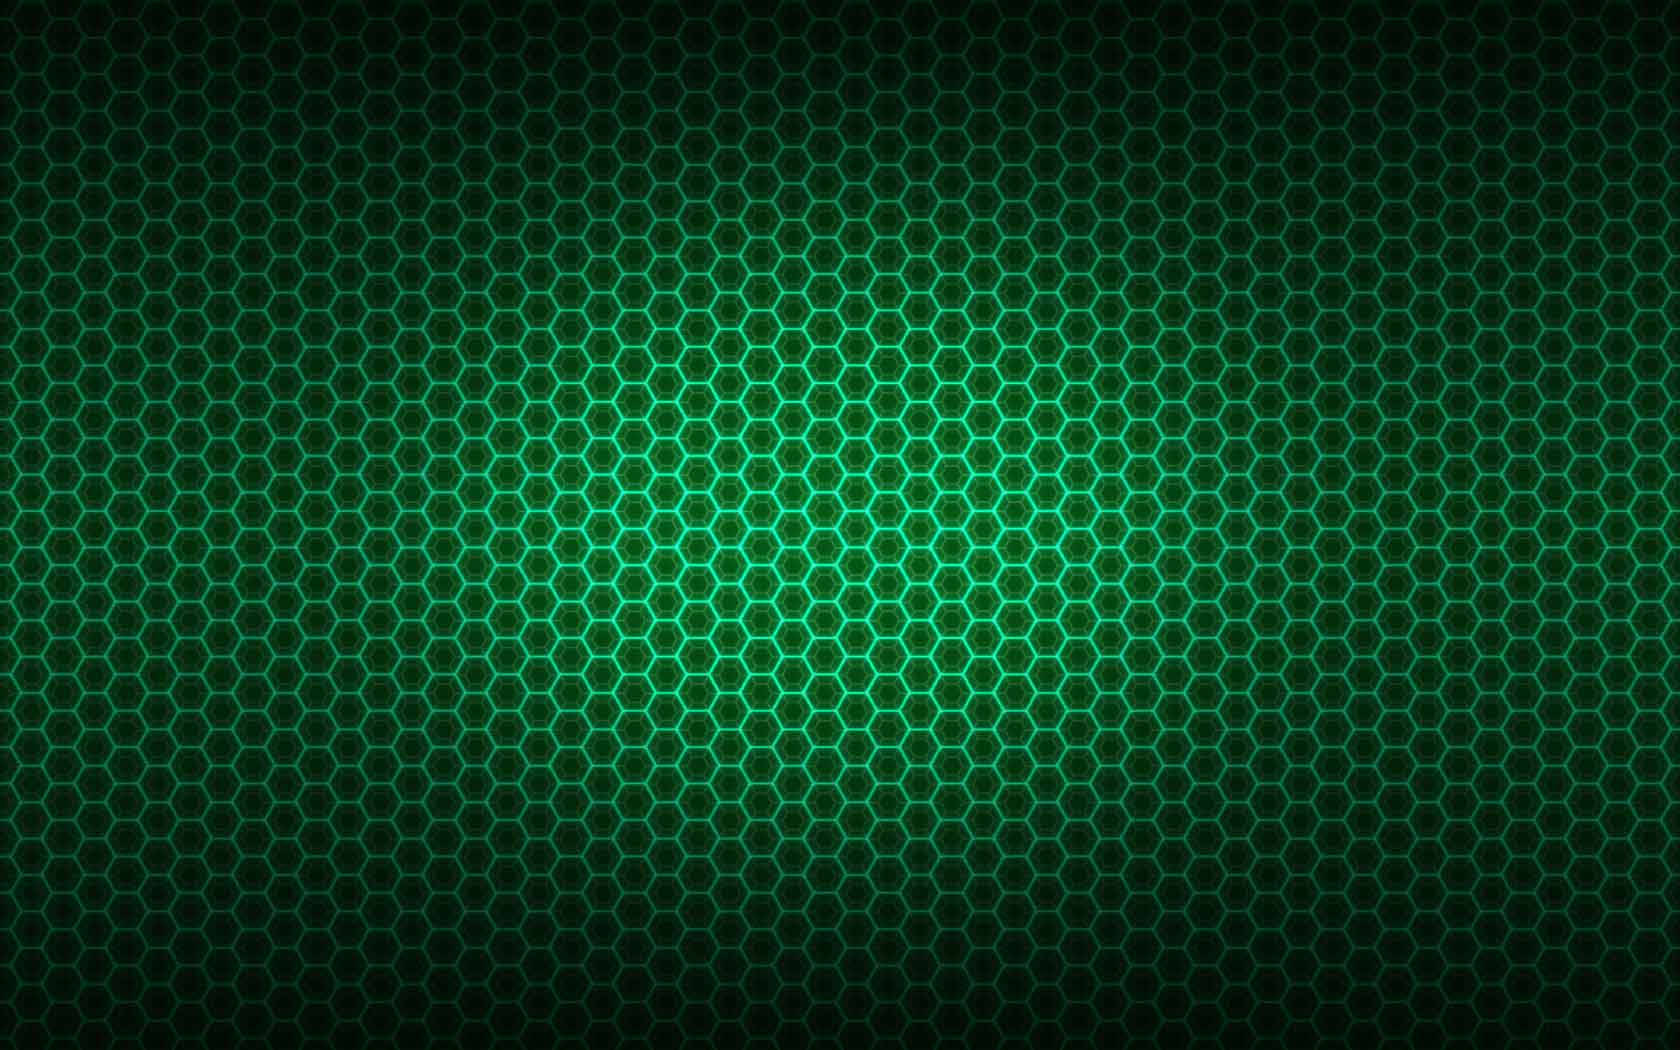 Snake Game Scales Wallpaper